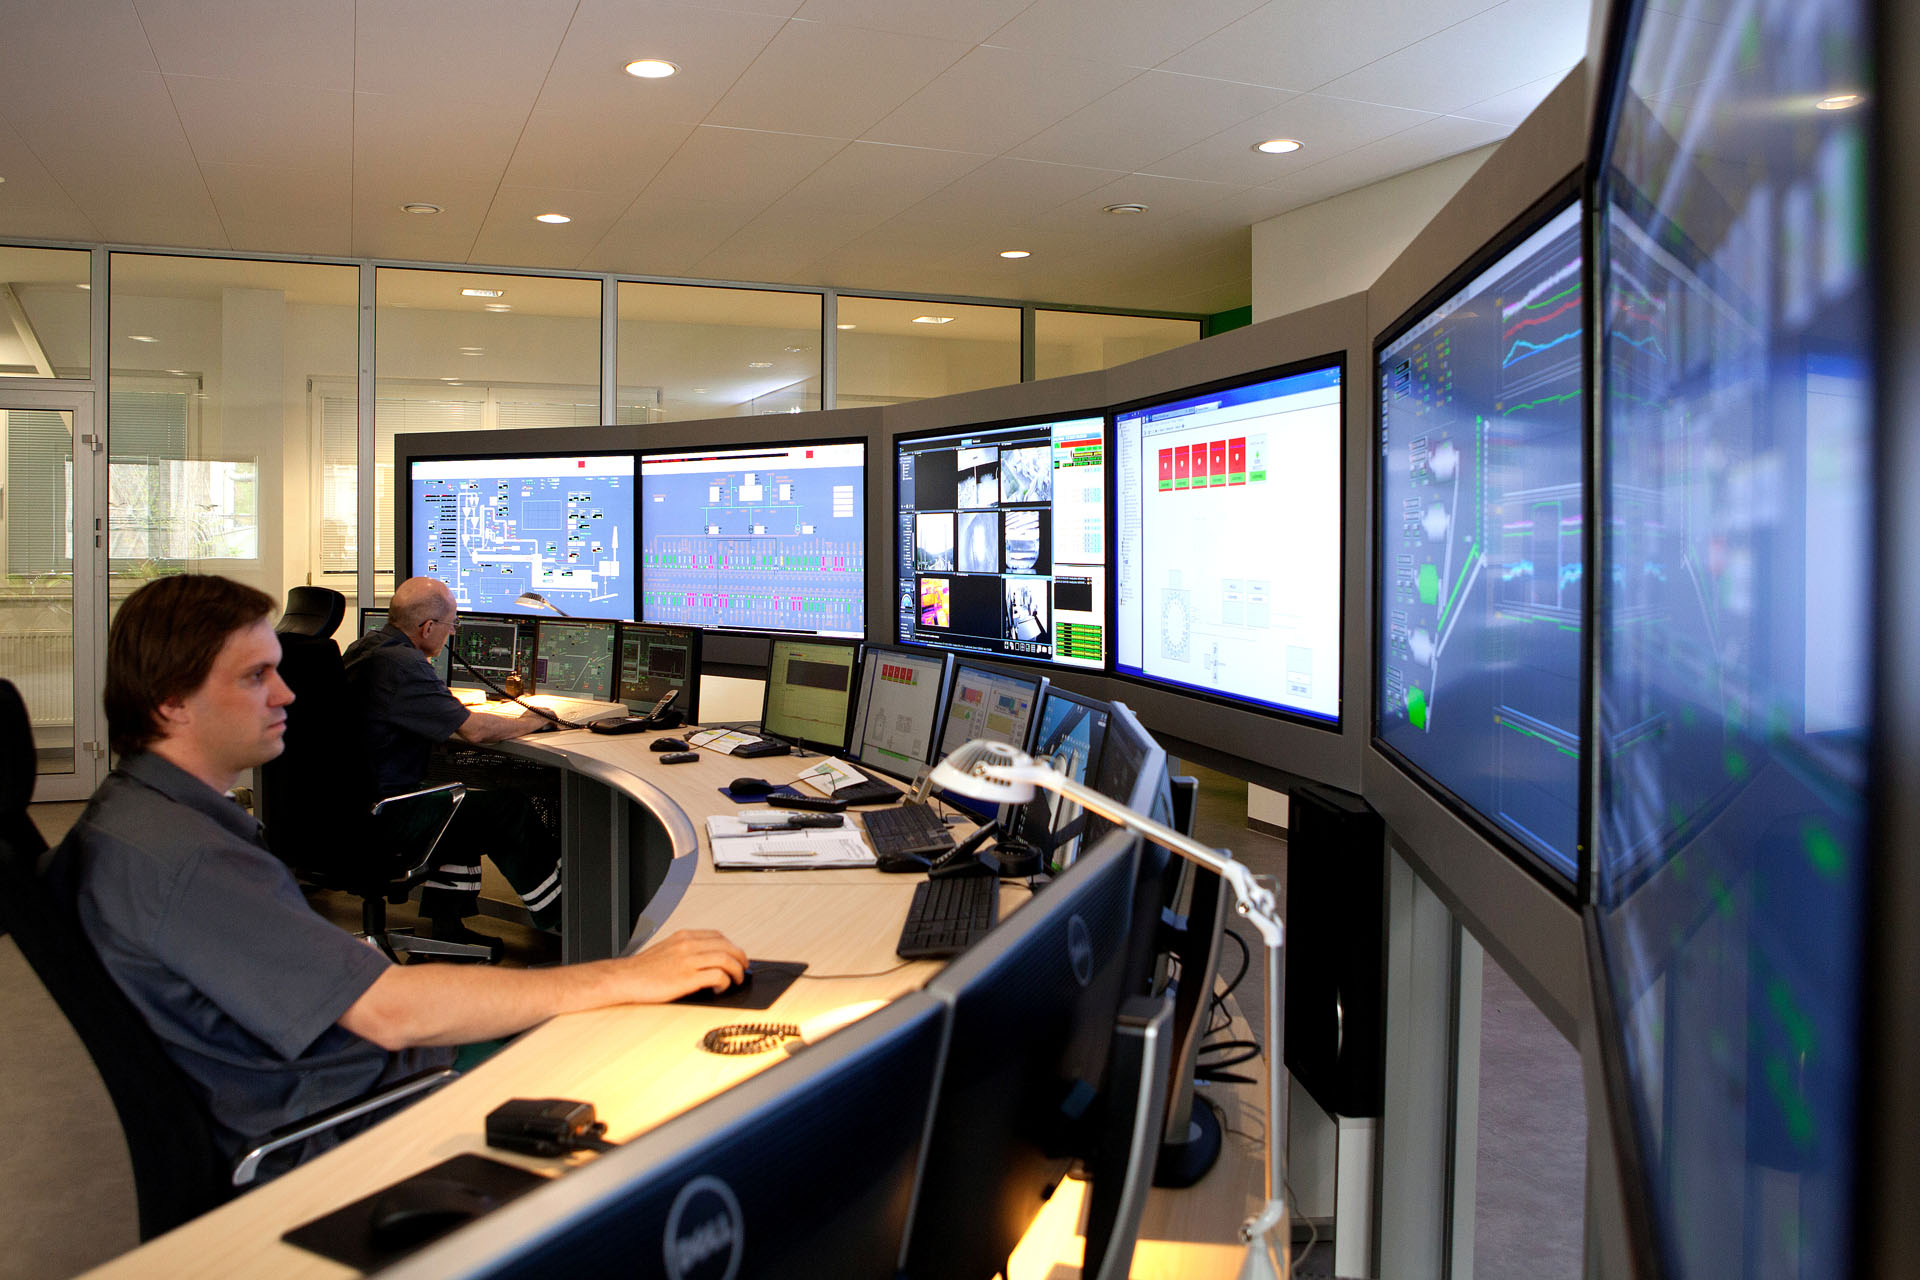 Three people sit in front of many control monitors